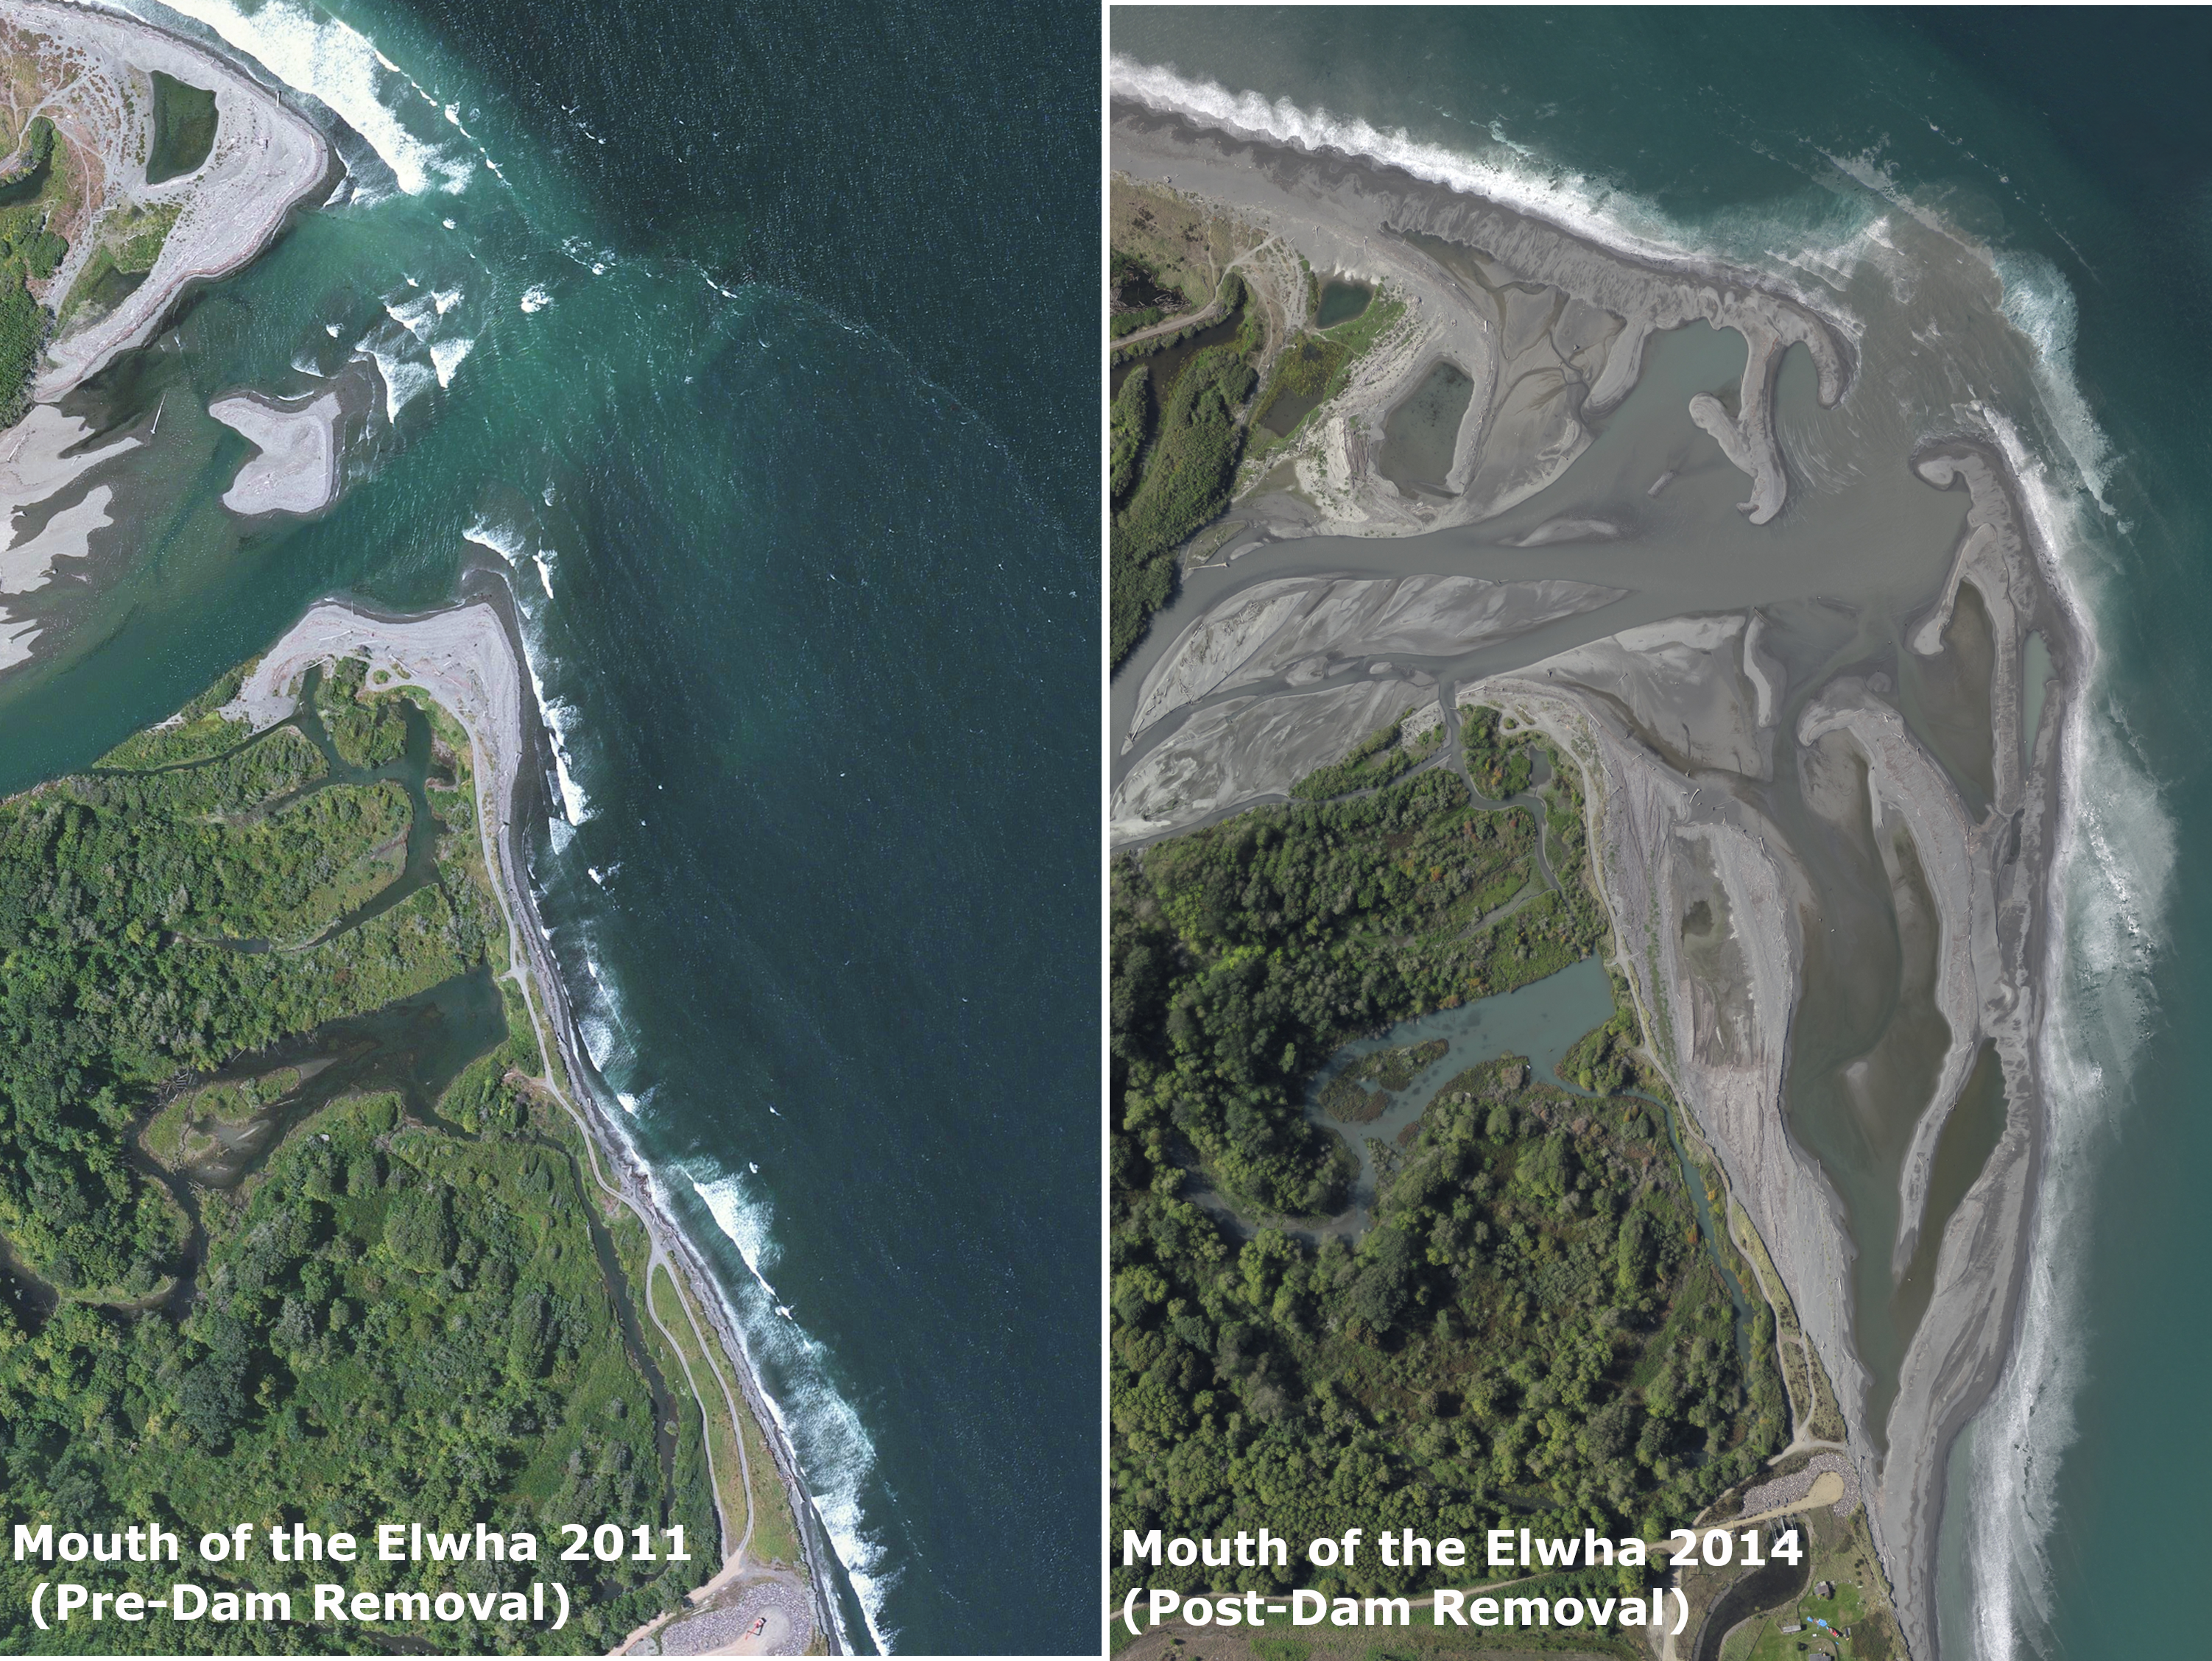 Change in the mouth of the Elwha River following dam removal.